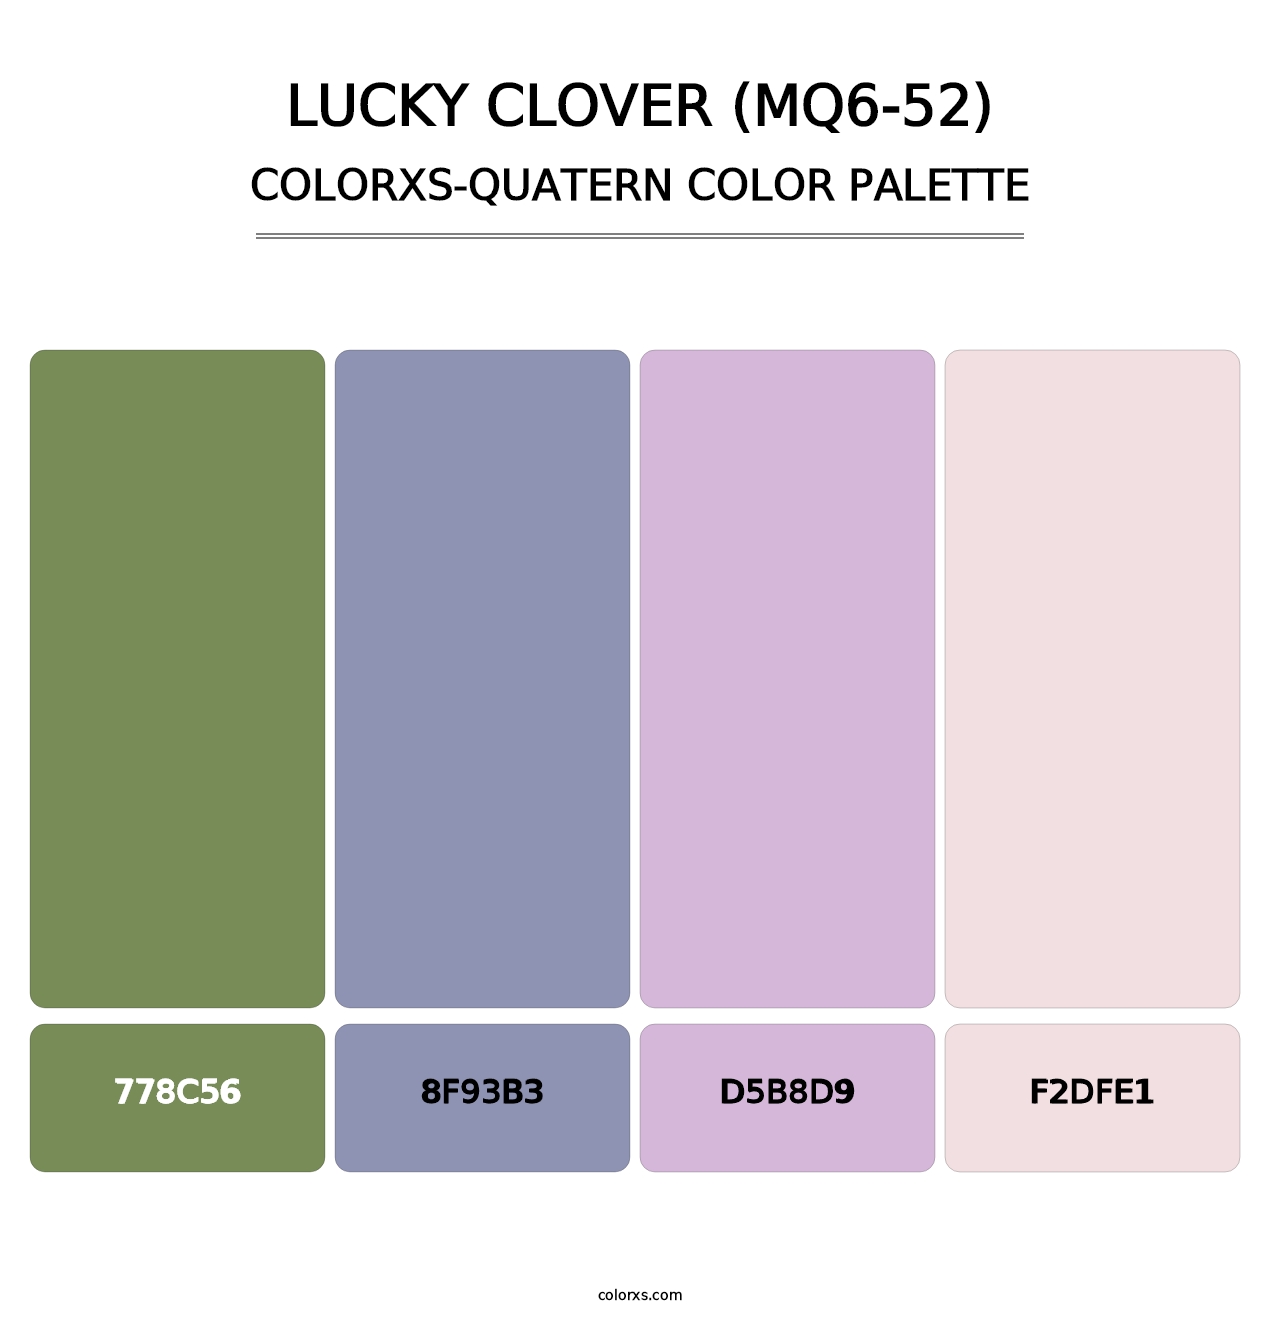 Lucky Clover (MQ6-52) - Colorxs Quatern Palette